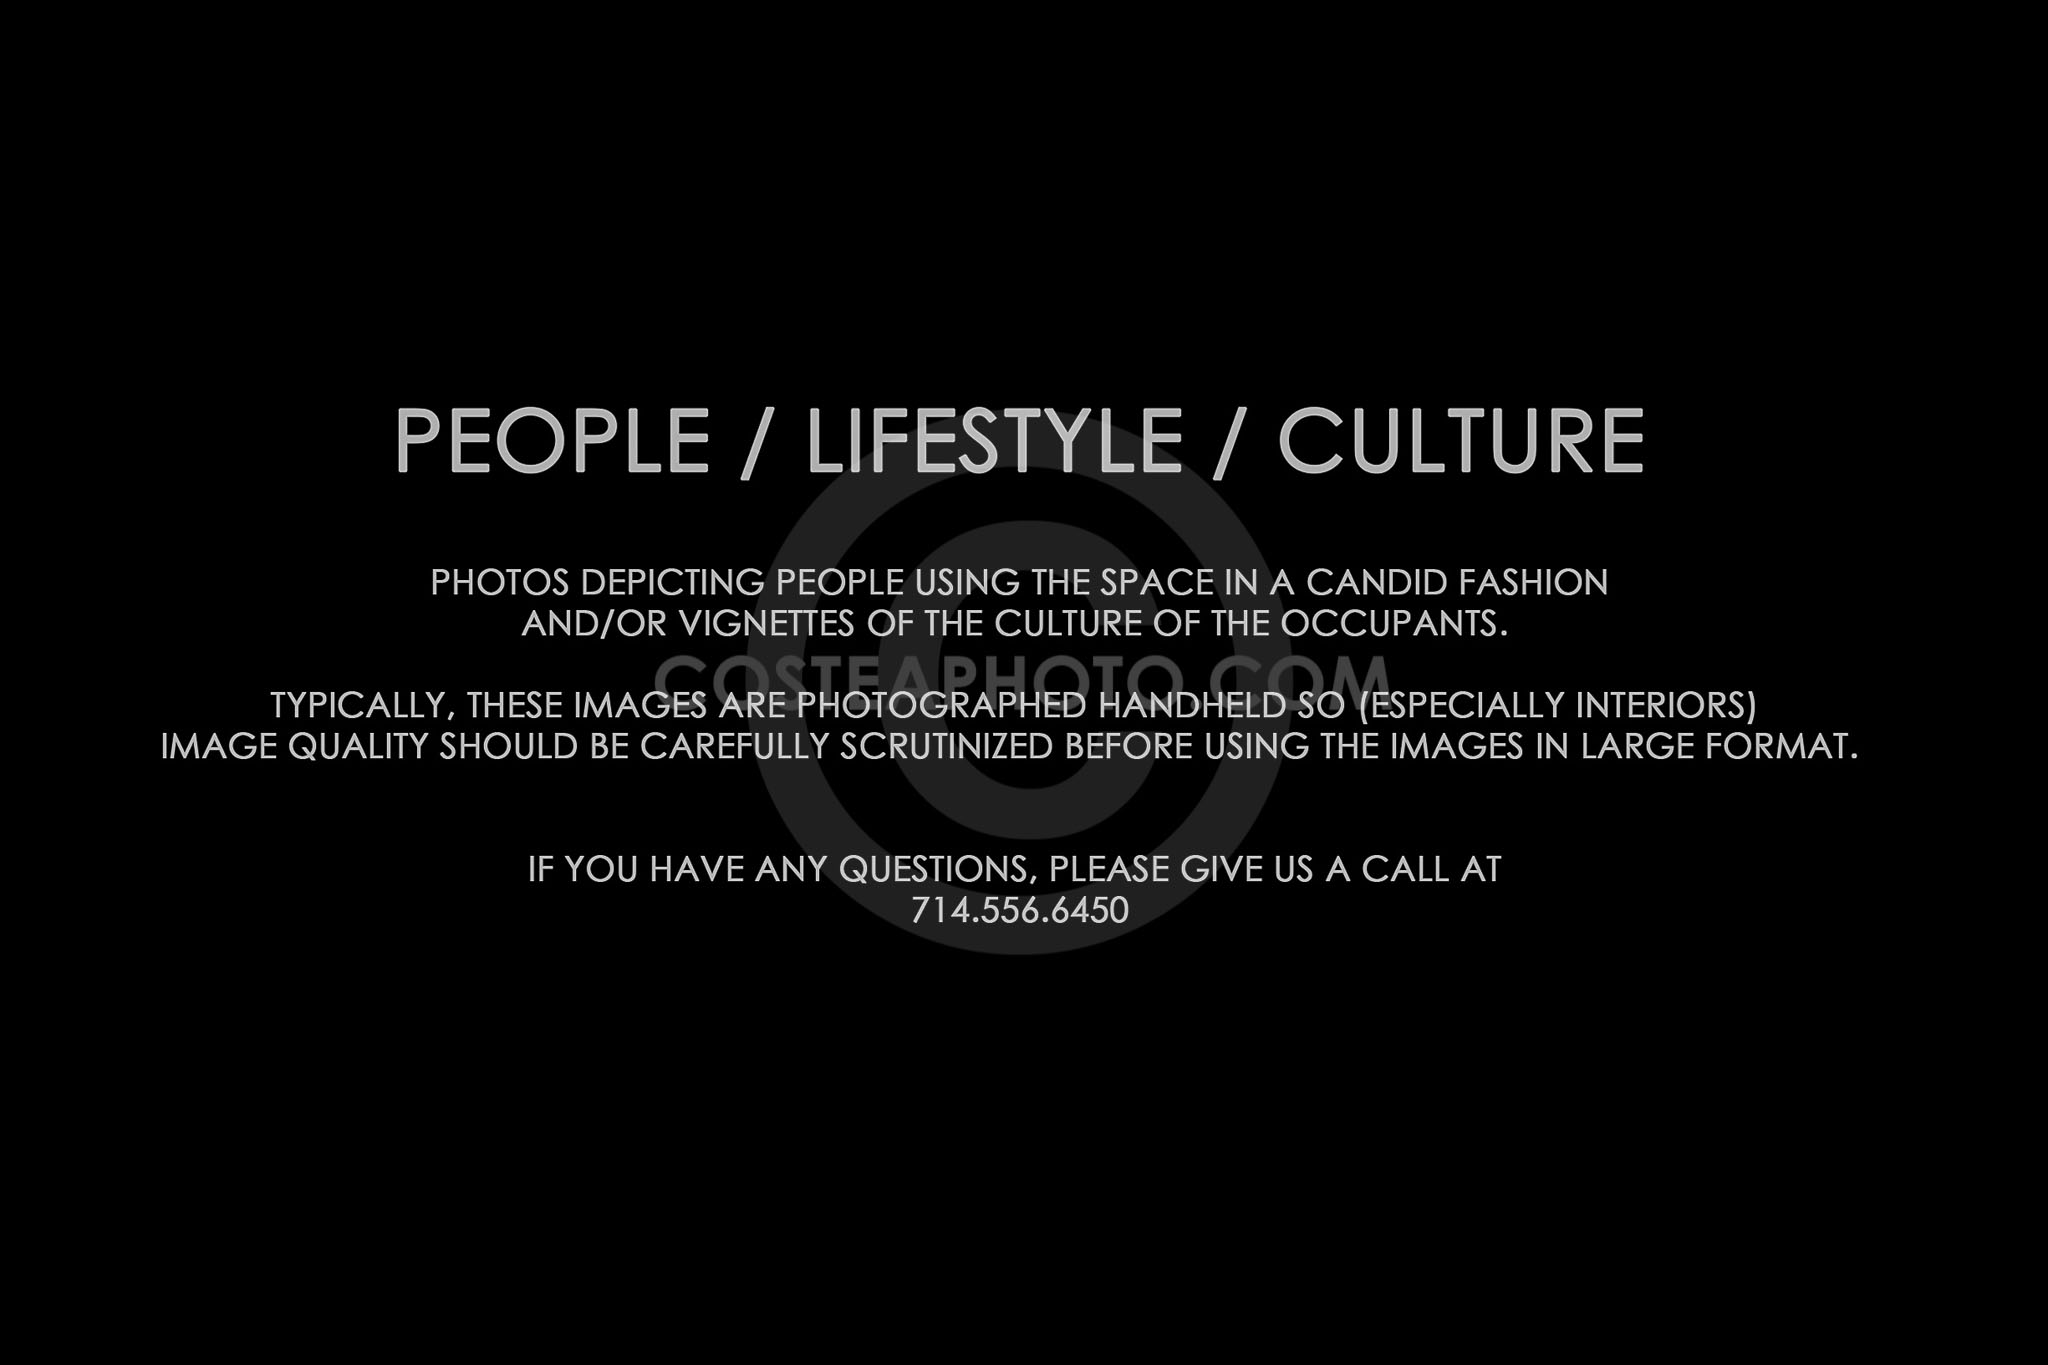 (160) TITLE PAGE - PEOPLE LIFESTYLE